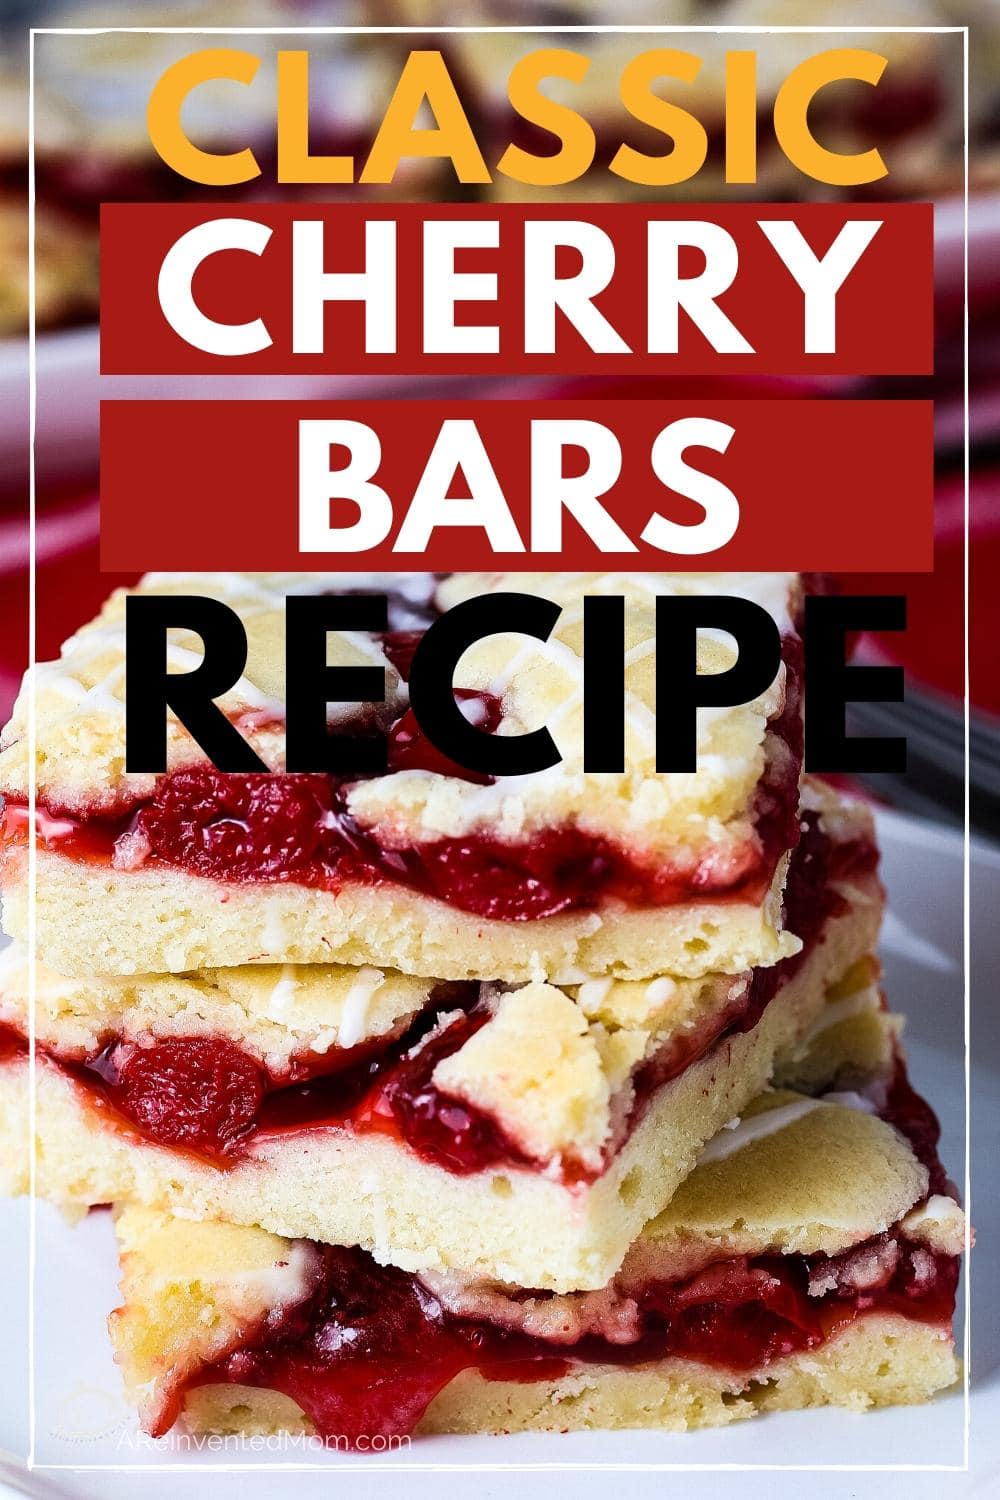 Closeup of 3 Glazed Cherry Pie bars on a white plate with graphic overlay | A Reinvented Mom